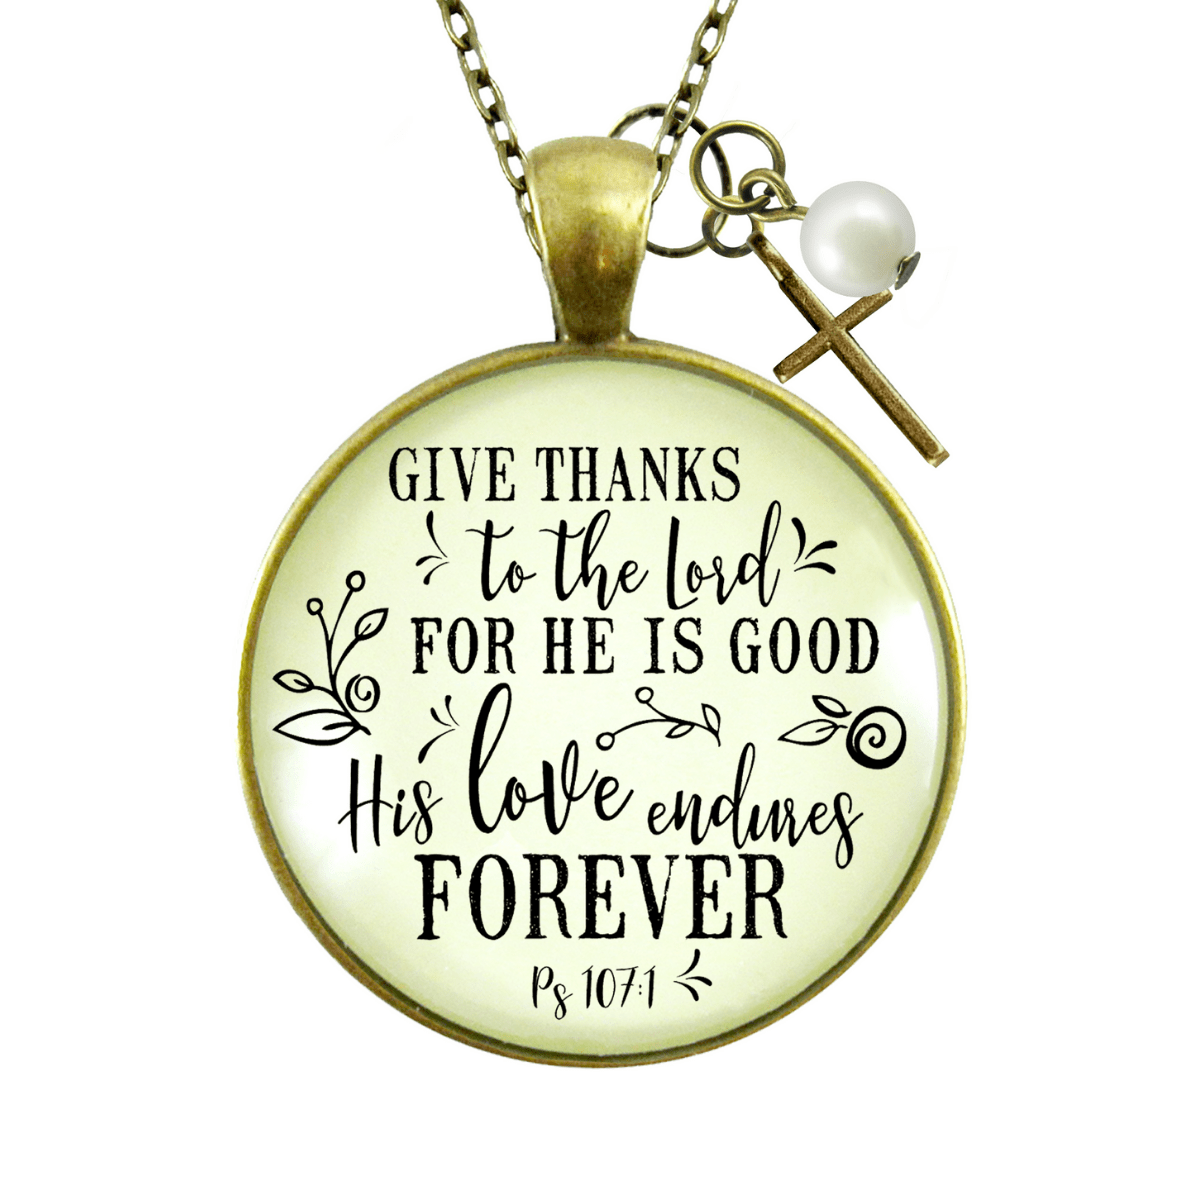 Give Thanks Necklace He is Good Faith Jewelry For Women - Gutsy Goodness